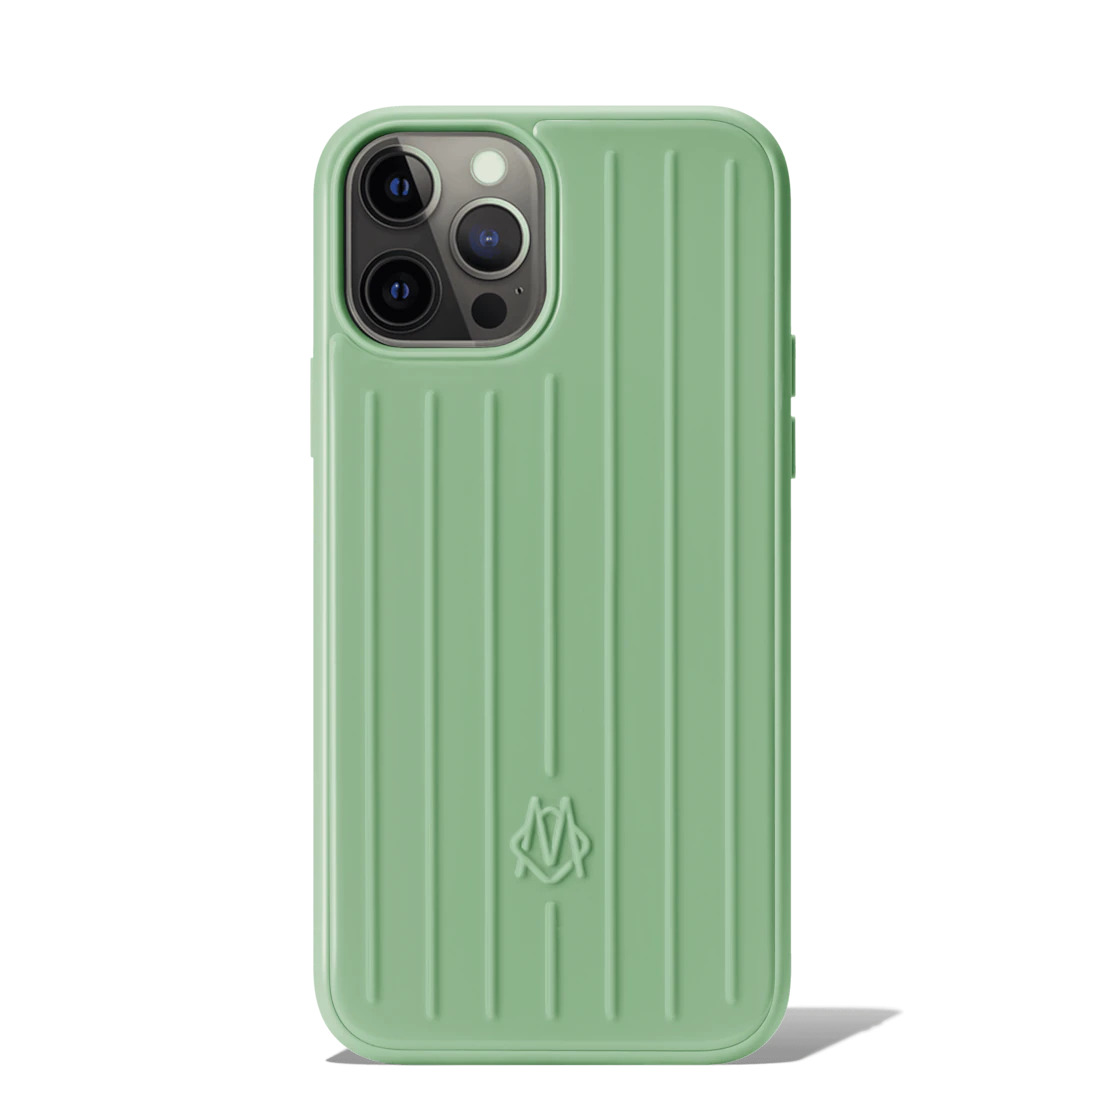 iPhone Accessories Bamboo Green Case for iPhone 12 & 12 Pro - 1